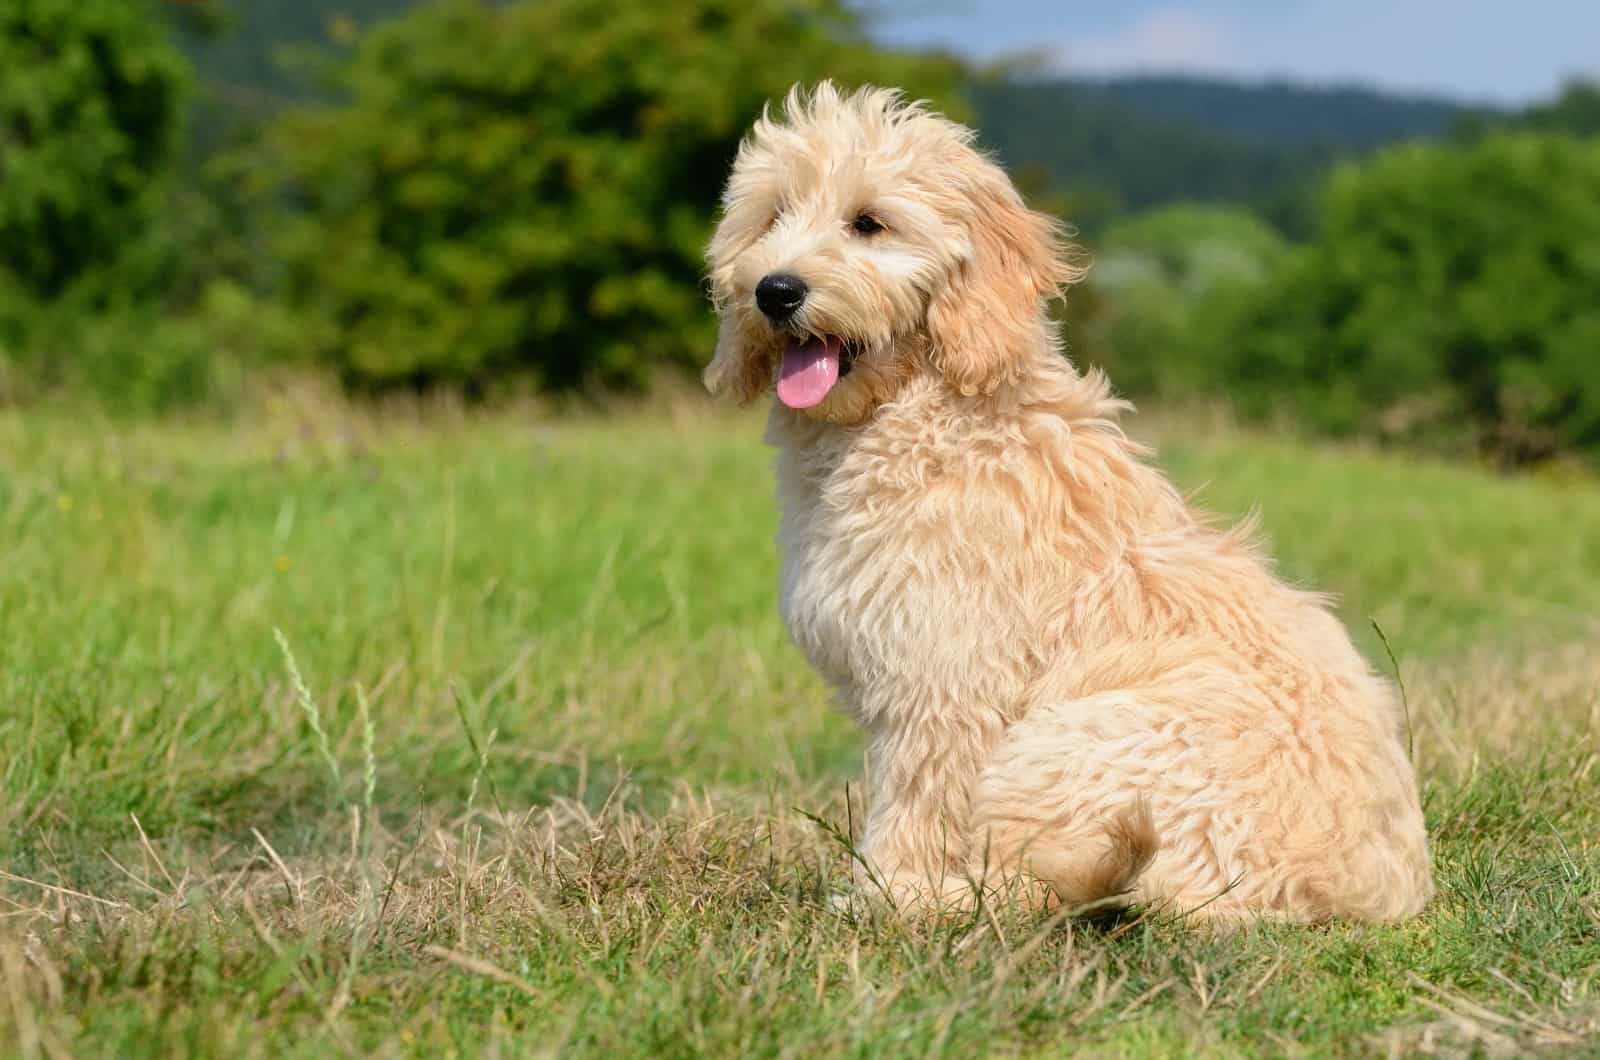 Goldendoodle sitting on grass outside